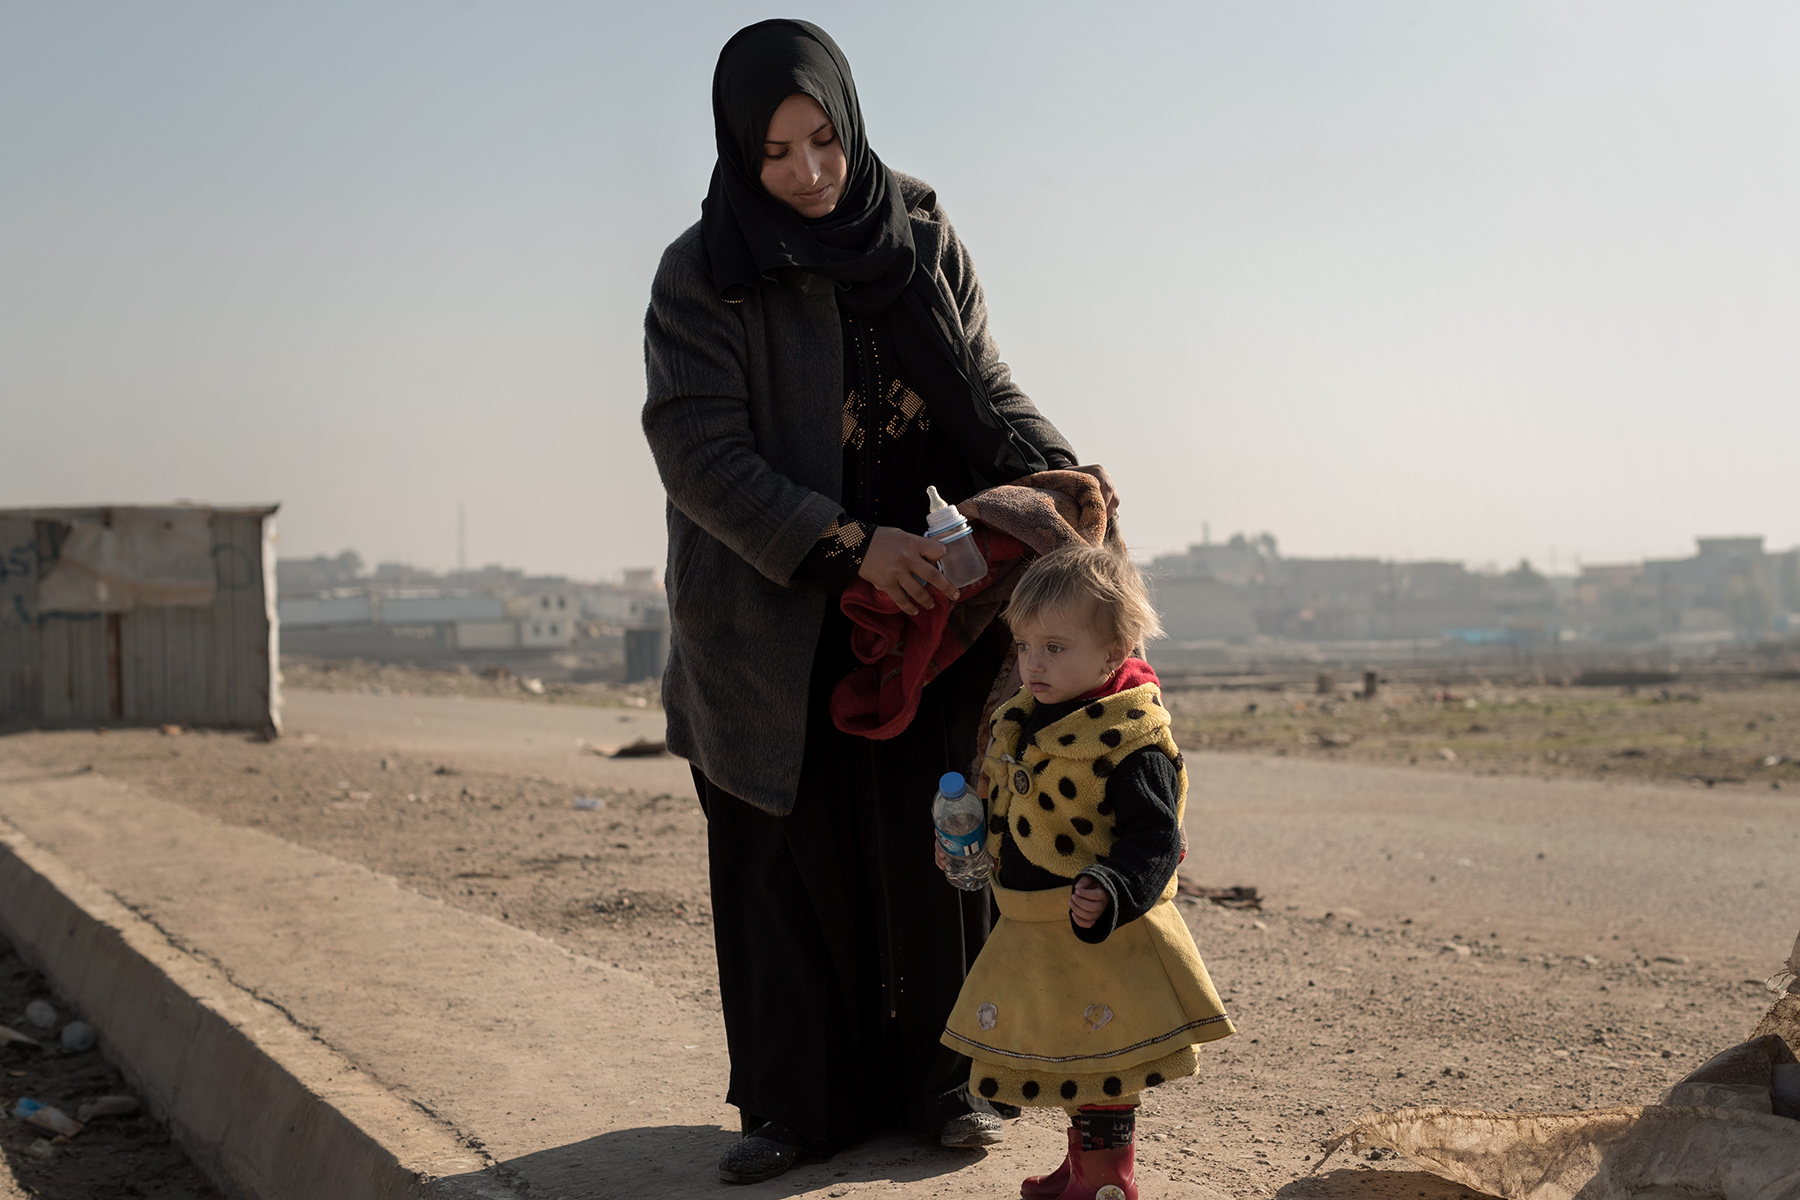 On the roadside between Al-Quds and Gogjali, a couple and their daughter escape from Al-Quds neighborhood, liberated three days ago, to a safer place farthest north of Kurdistan. Mosul, Iraq on Jan. 6, 2017. They lived with other Moslawis hidden from ISIS during two and a half years in the basement of a mosque and learned the arrival of the Iraqi Forces on Alghad FM. The husband, a former police officer, has been tortured by ISIS soldiers. They are relieved to be free but fear that ISIS could come back and make flee the Iraqi Forces again. 